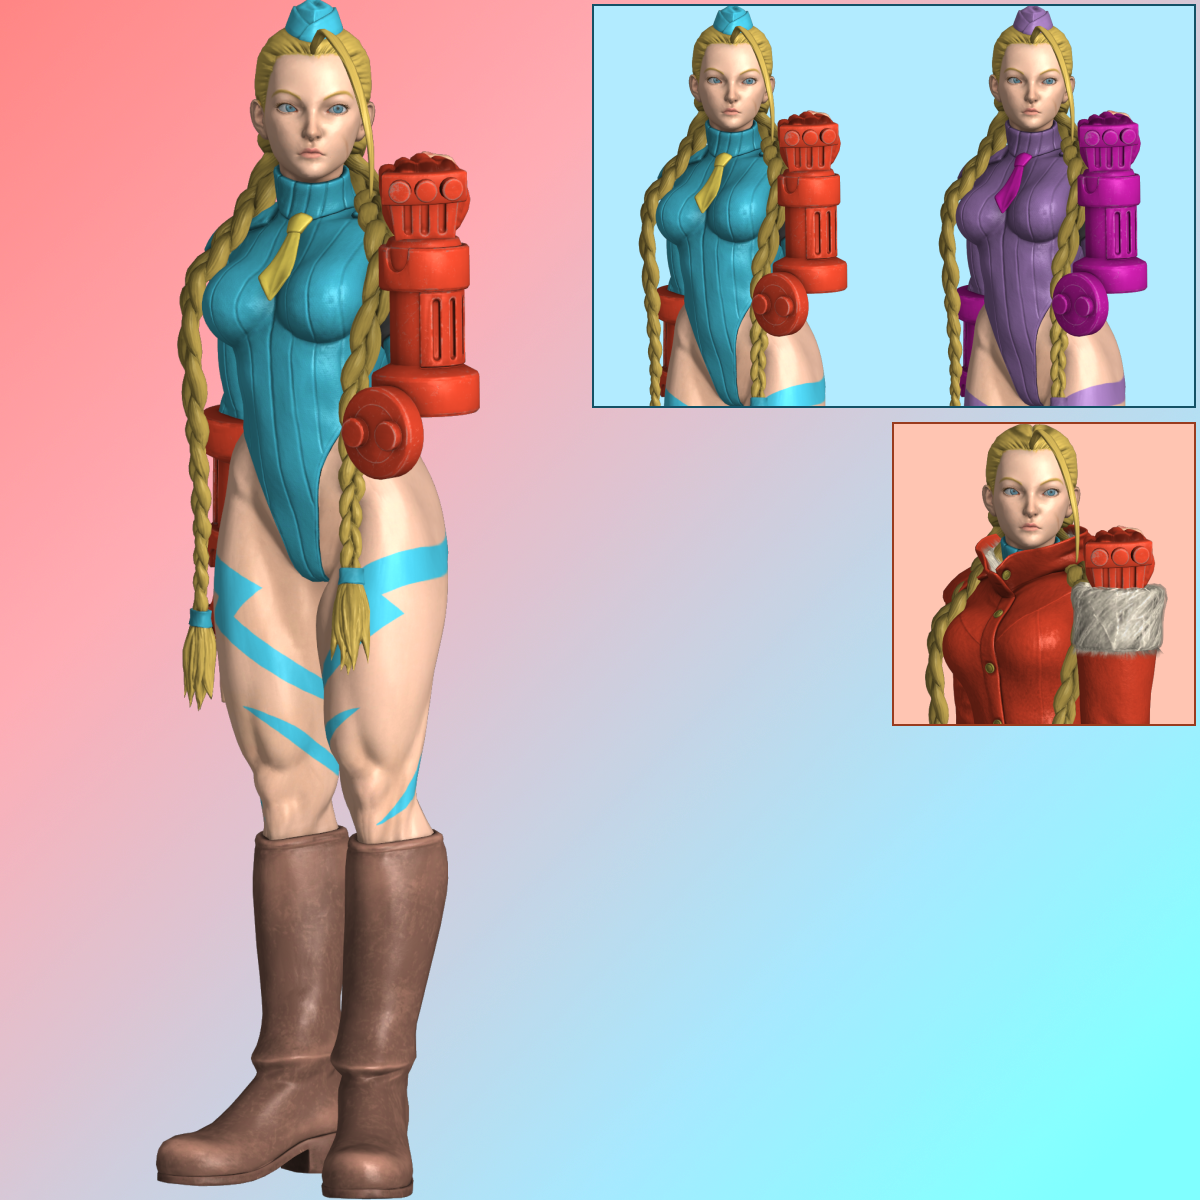 Layered armor sets inspired by Cammy from Street Fighter : r